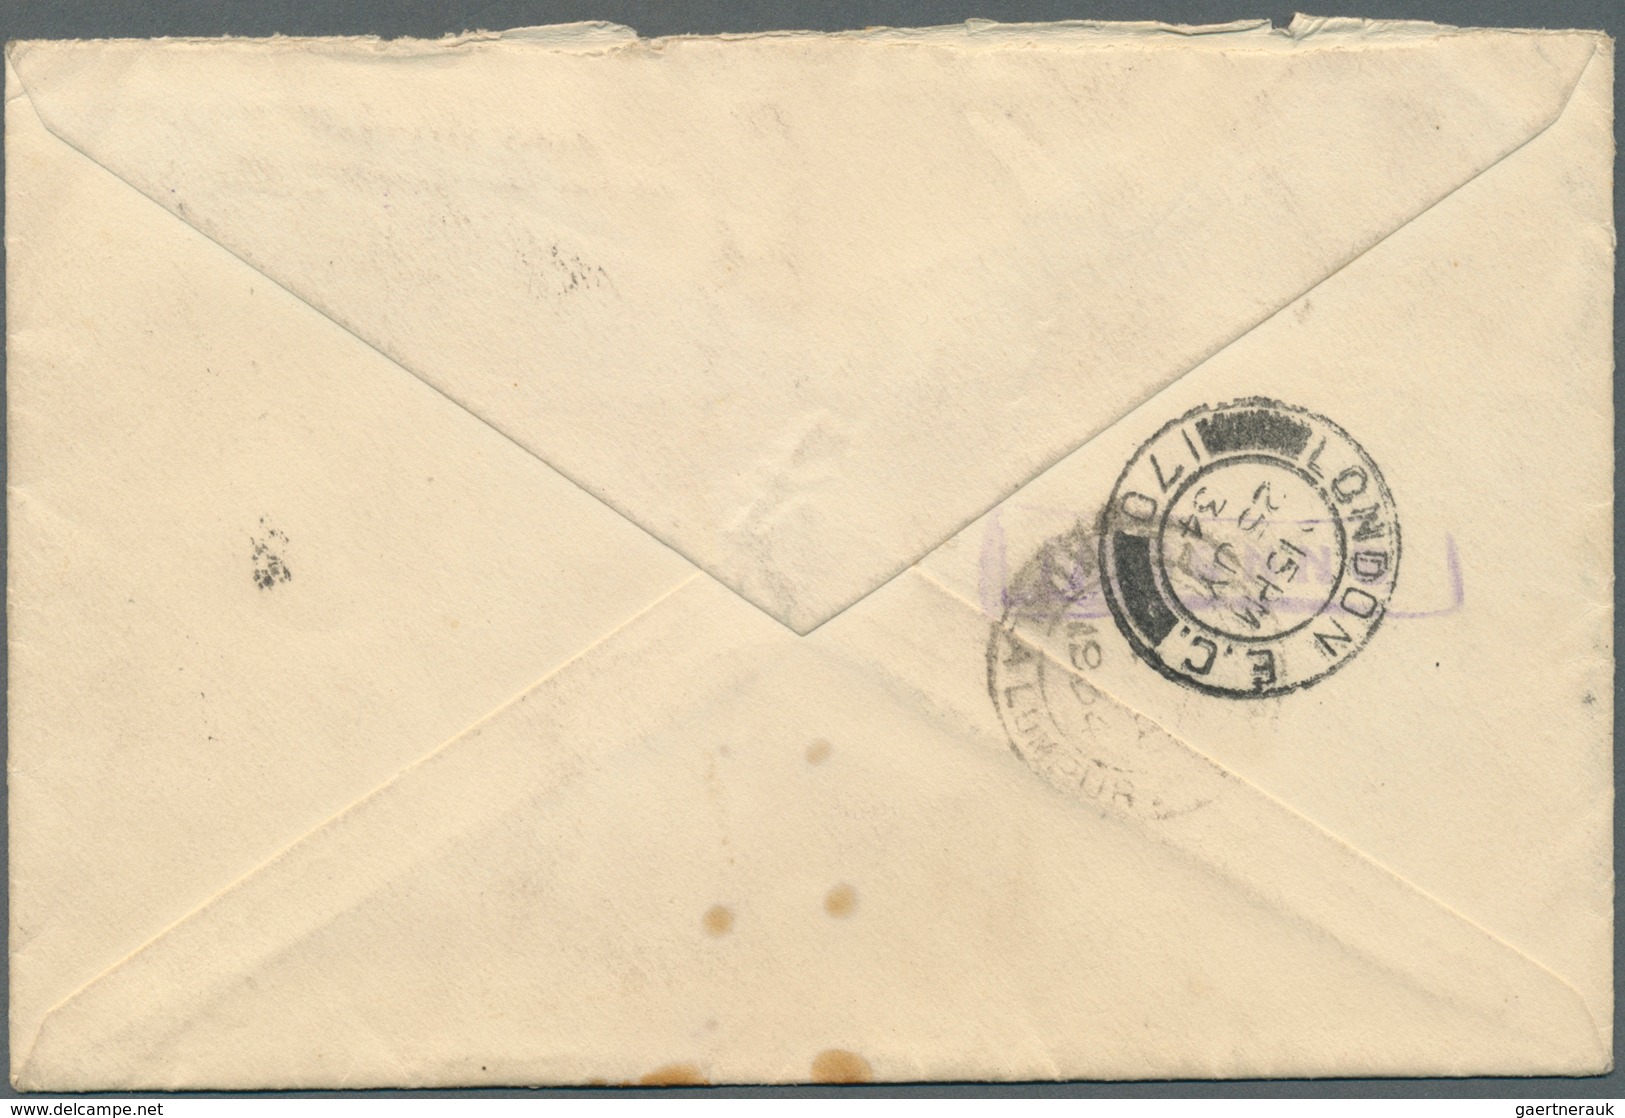 Malaiischer Staatenbund: 1934, Three 'Imperial Airways' Airmail Covers Bearing Tiger Stamps At 40c. - Federated Malay States